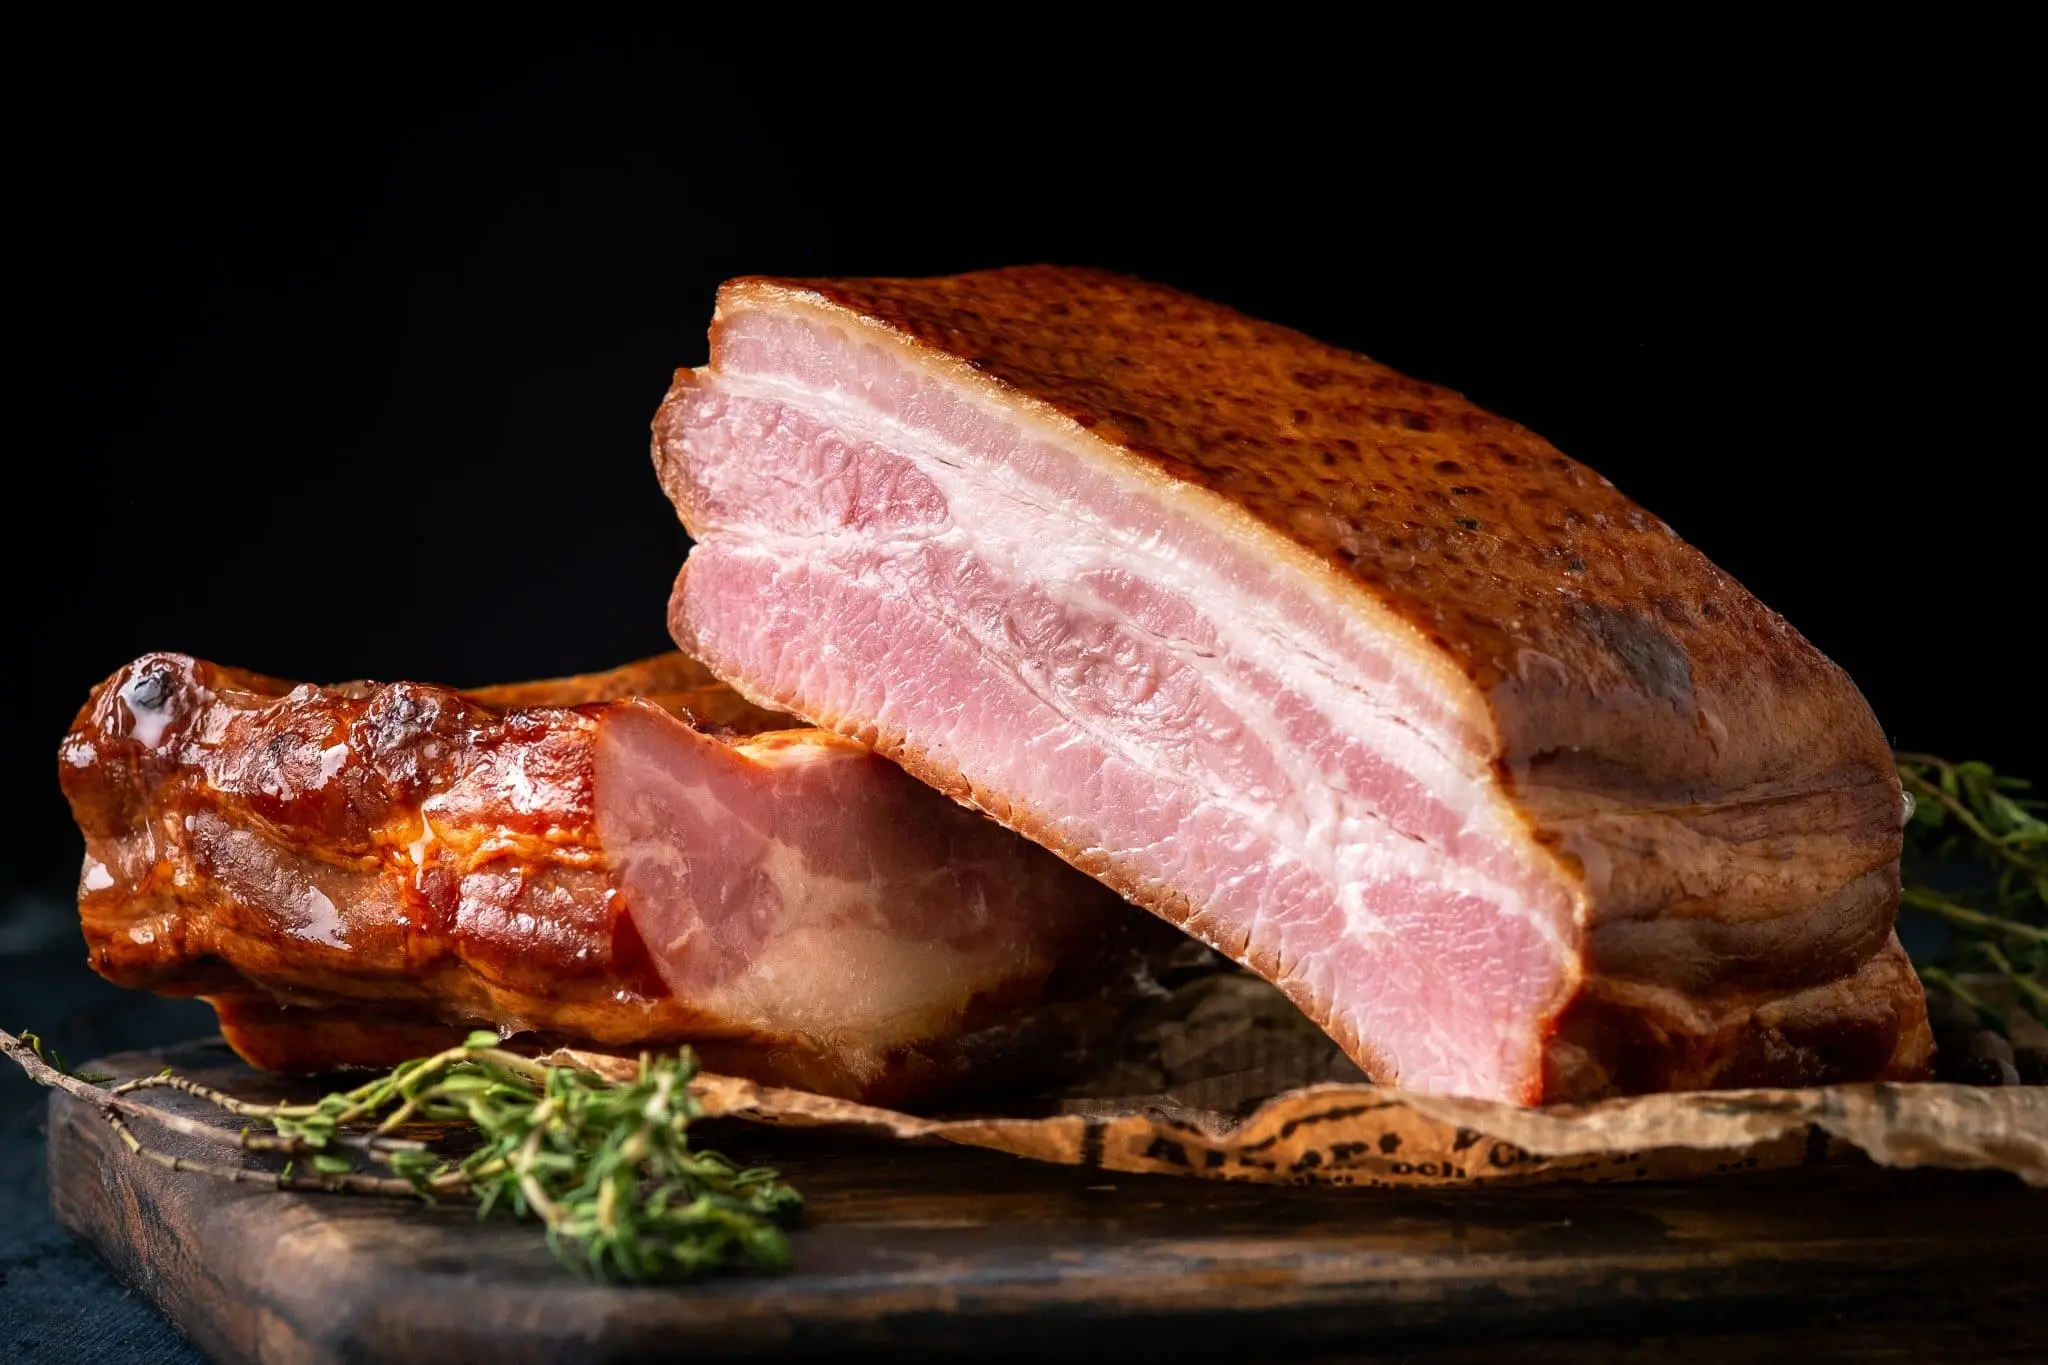 triple smoked bacon - What is triple smoked bacon